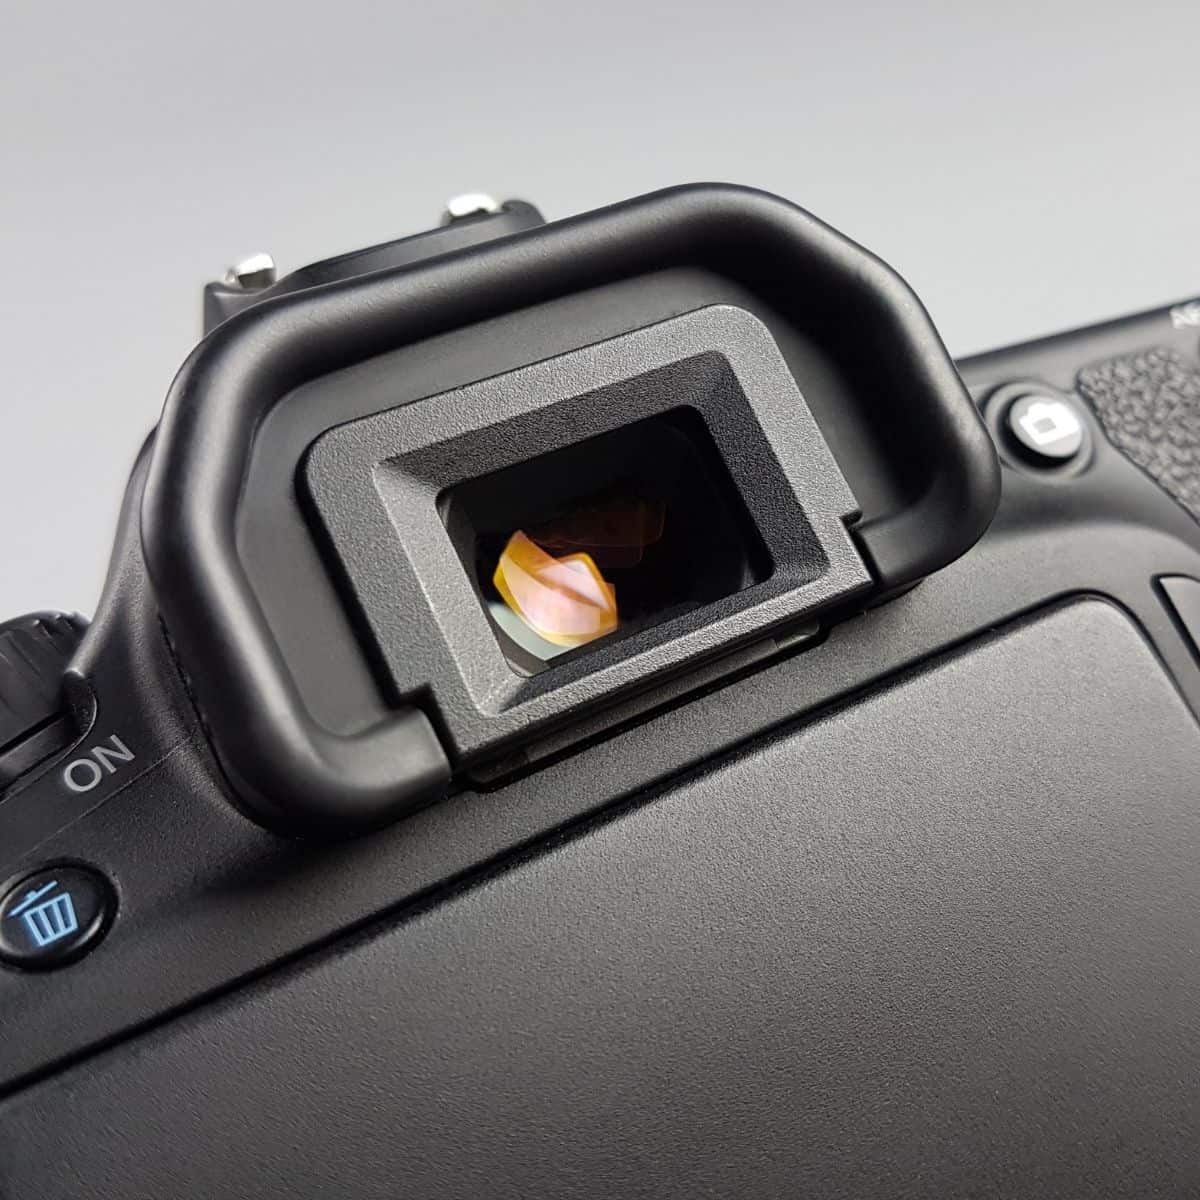 Close-up of a camera's viewfinder.